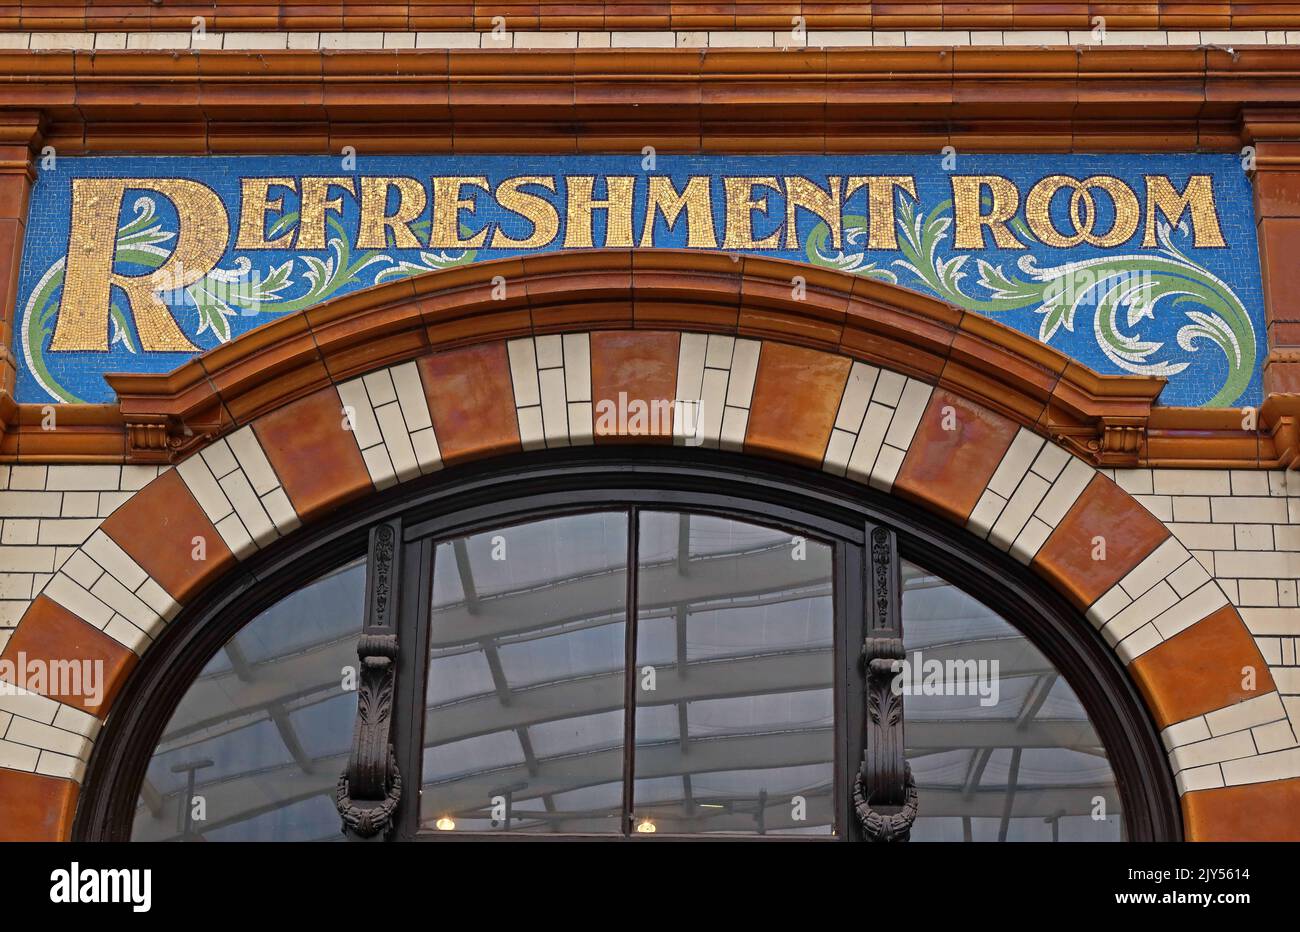 Victoria station Manchester, restaurant mosaic lettering, bookstall with mosaic decoration, Refreshment Room Stock Photo